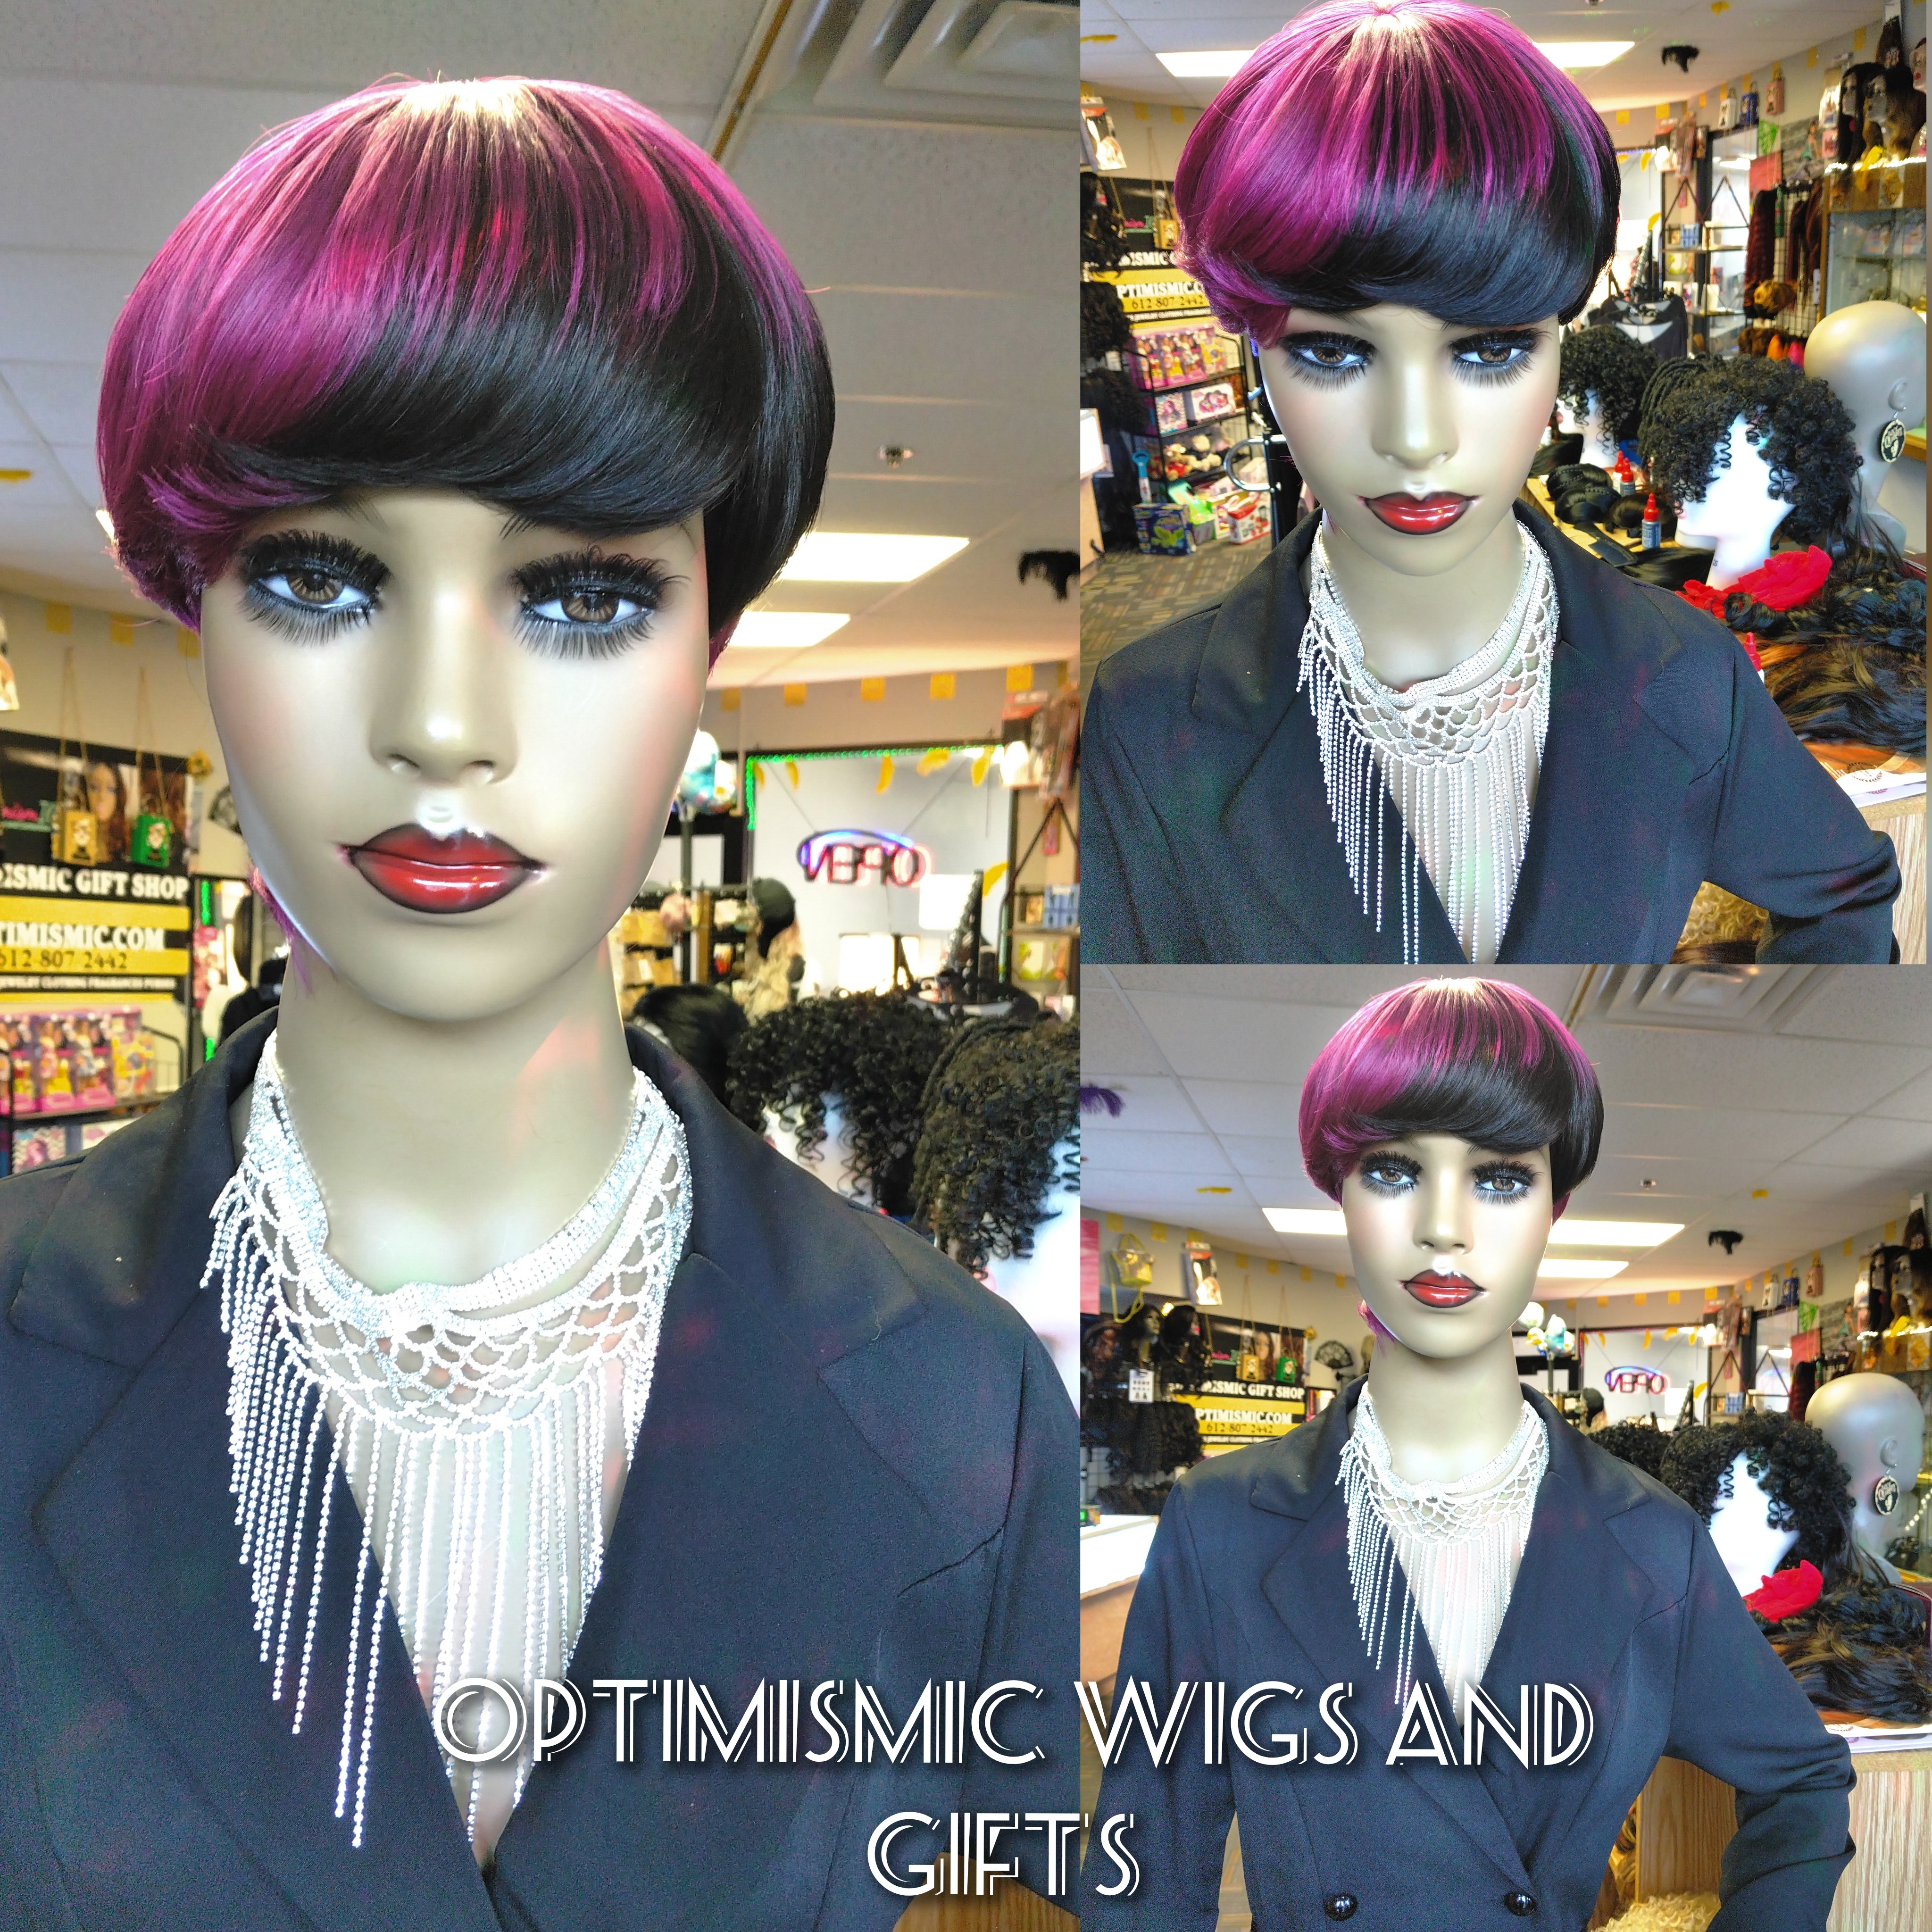 Buy Pink and black short pixie human hair wigs at optimismic wigs and gifts shop st paul $36.